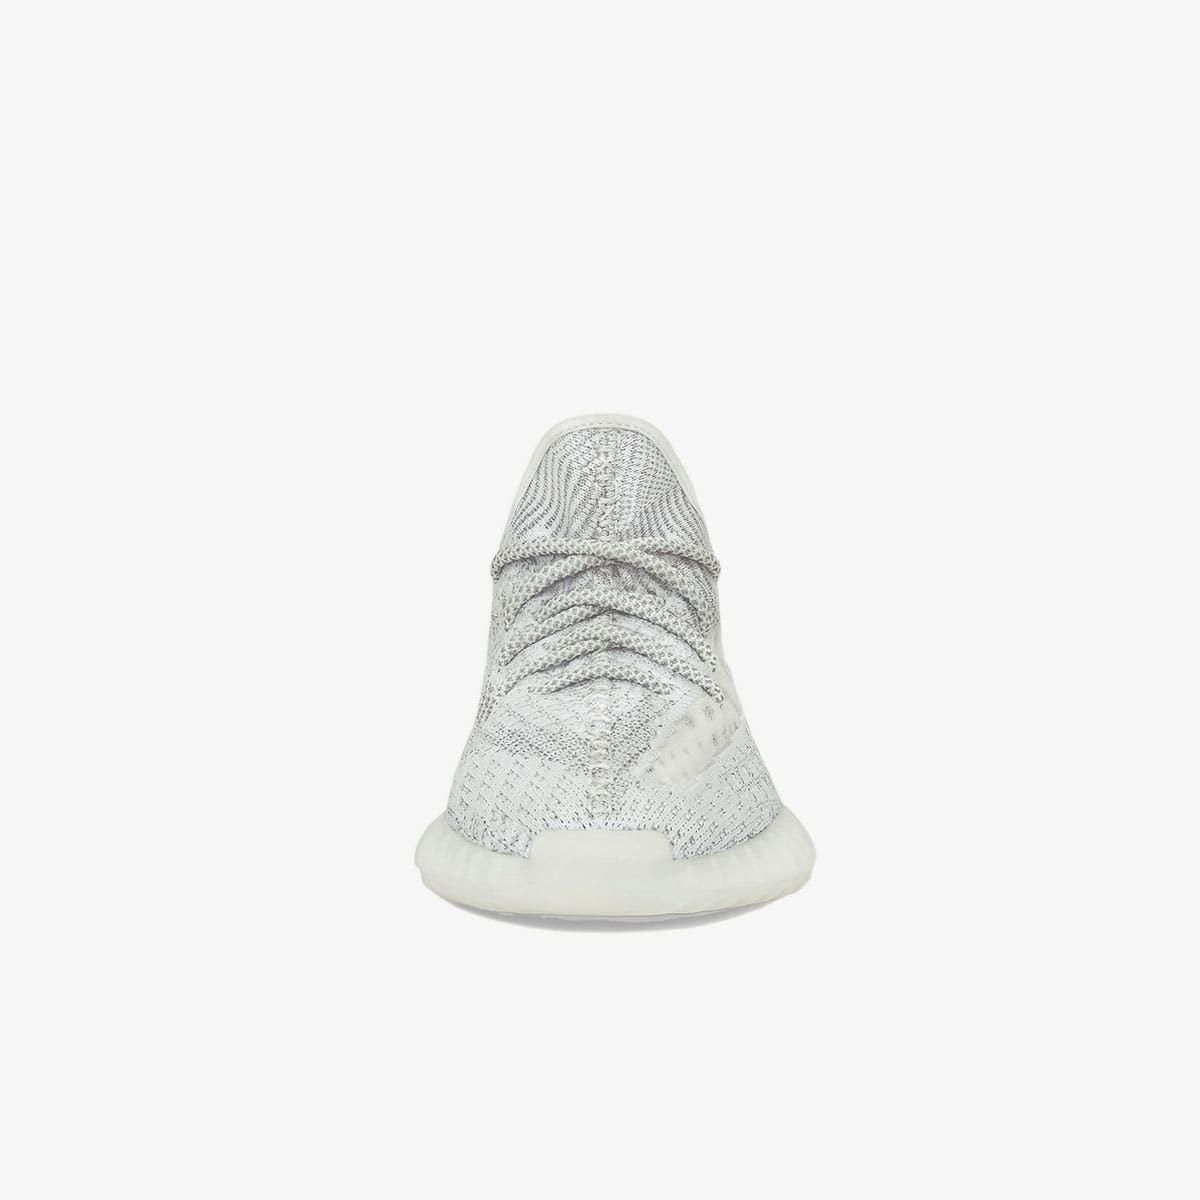 Yeezy Boost 350v2 (Static) | END. Launches